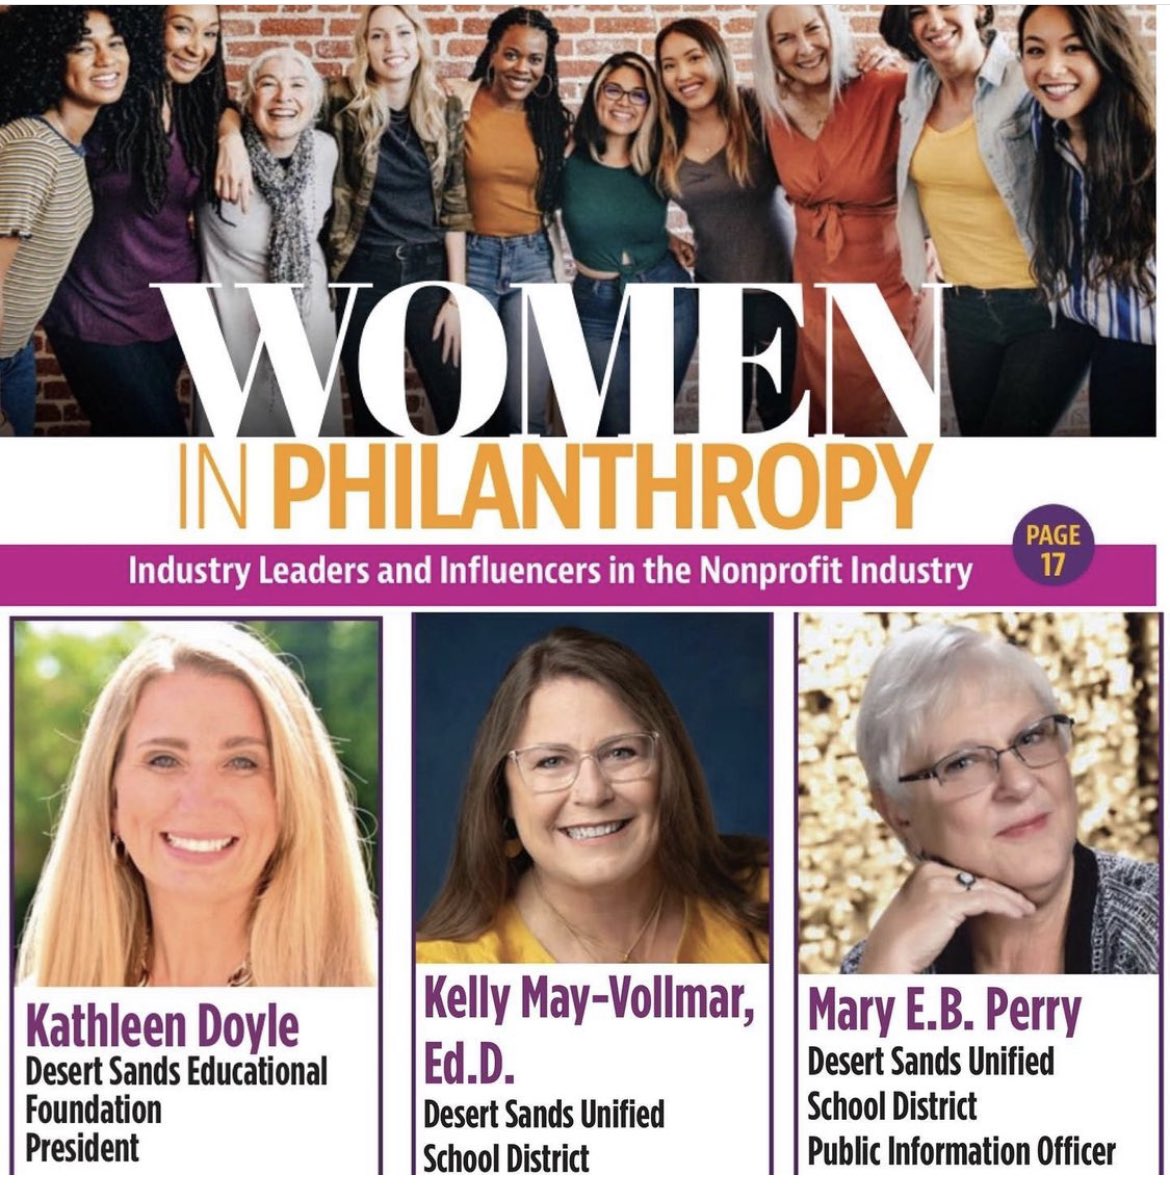 Honored to be included with these women. @DesertSandsUSD #womeninphilanthropy